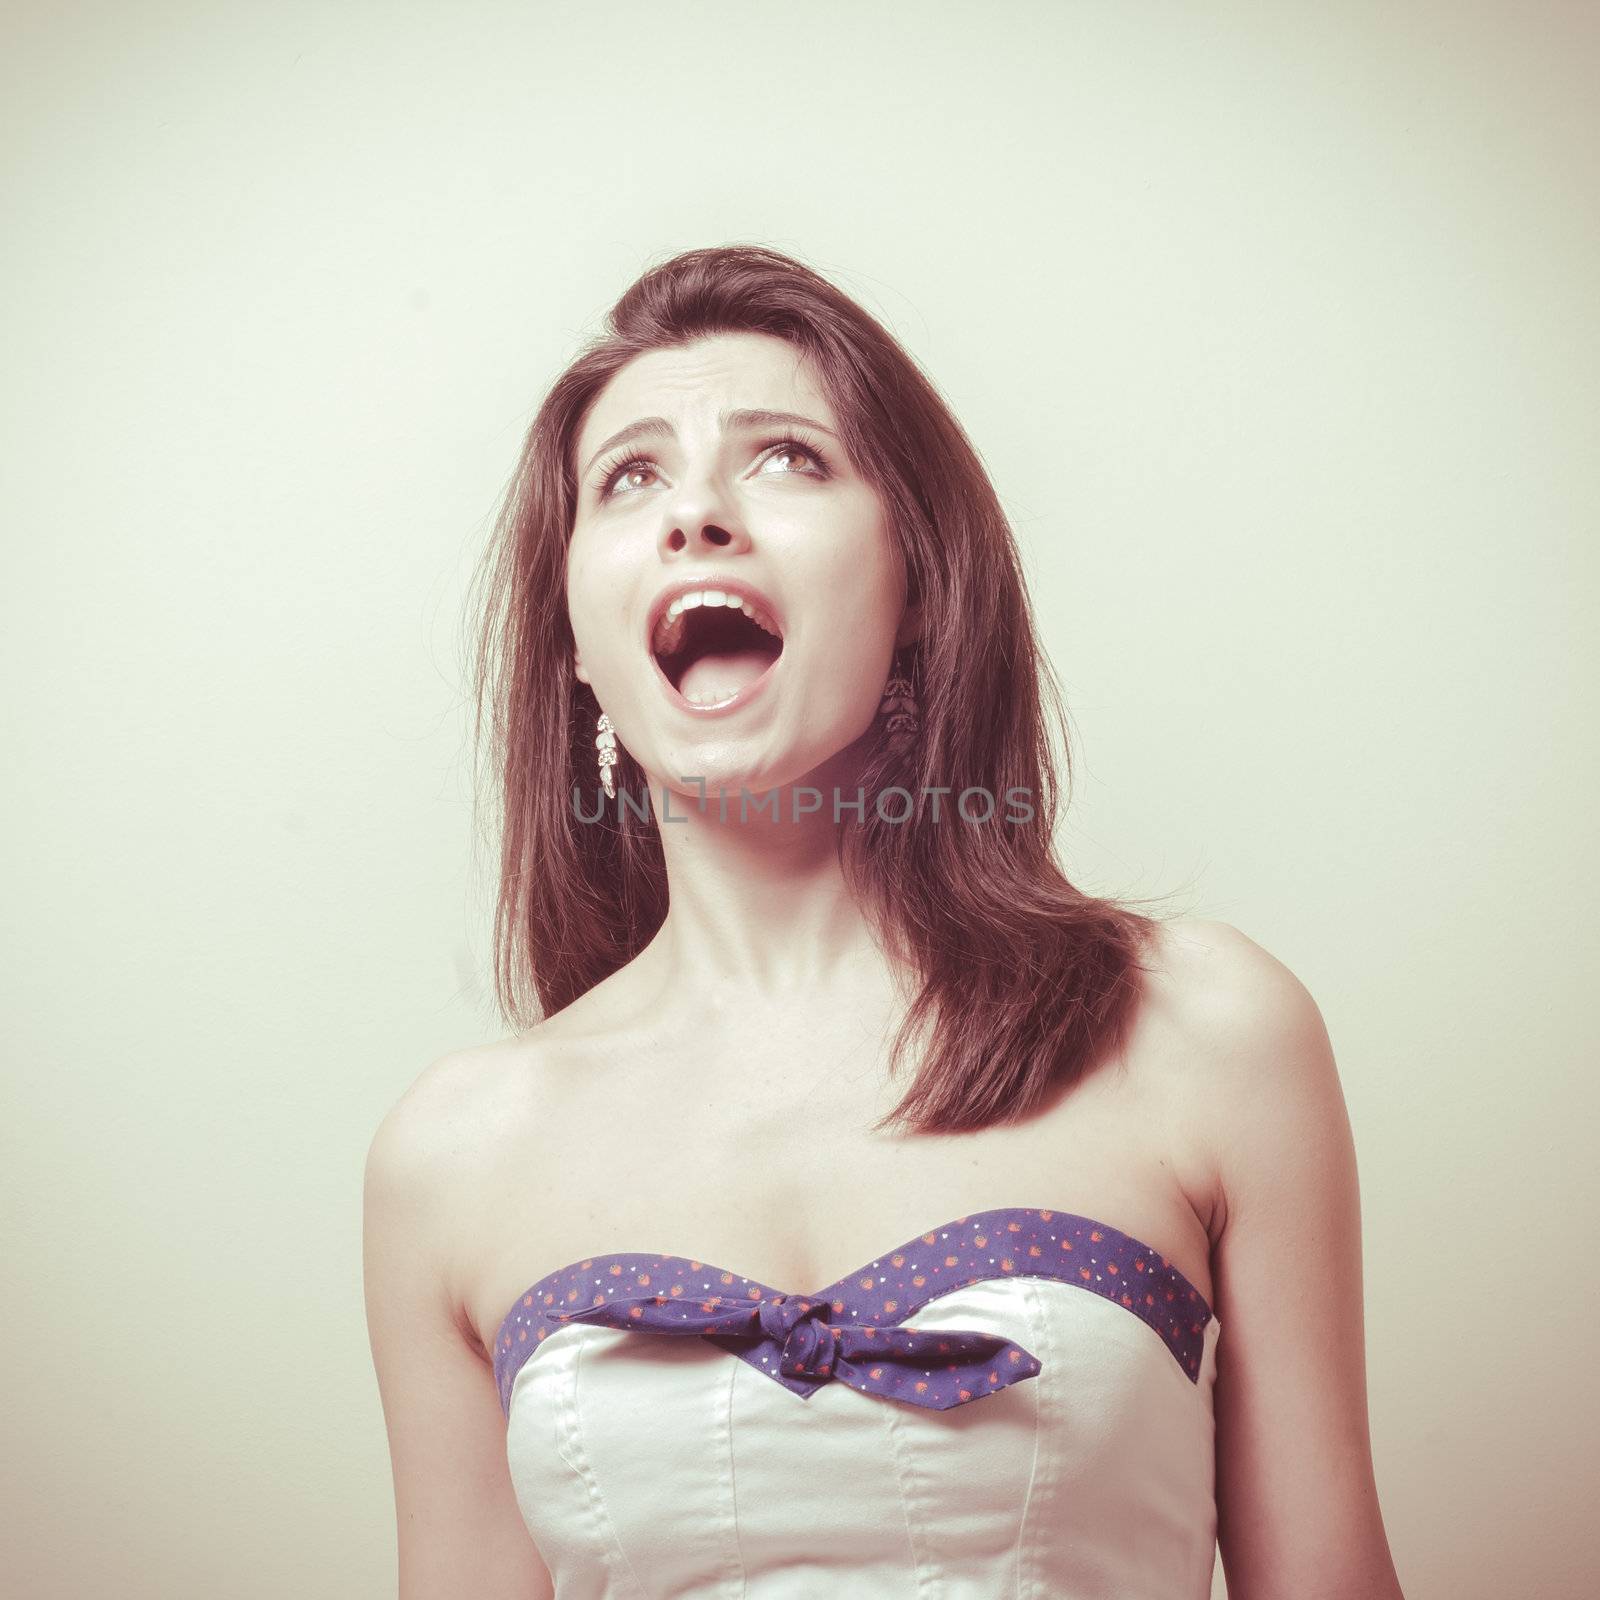 vintage portrait of young woman crying on vignetting background